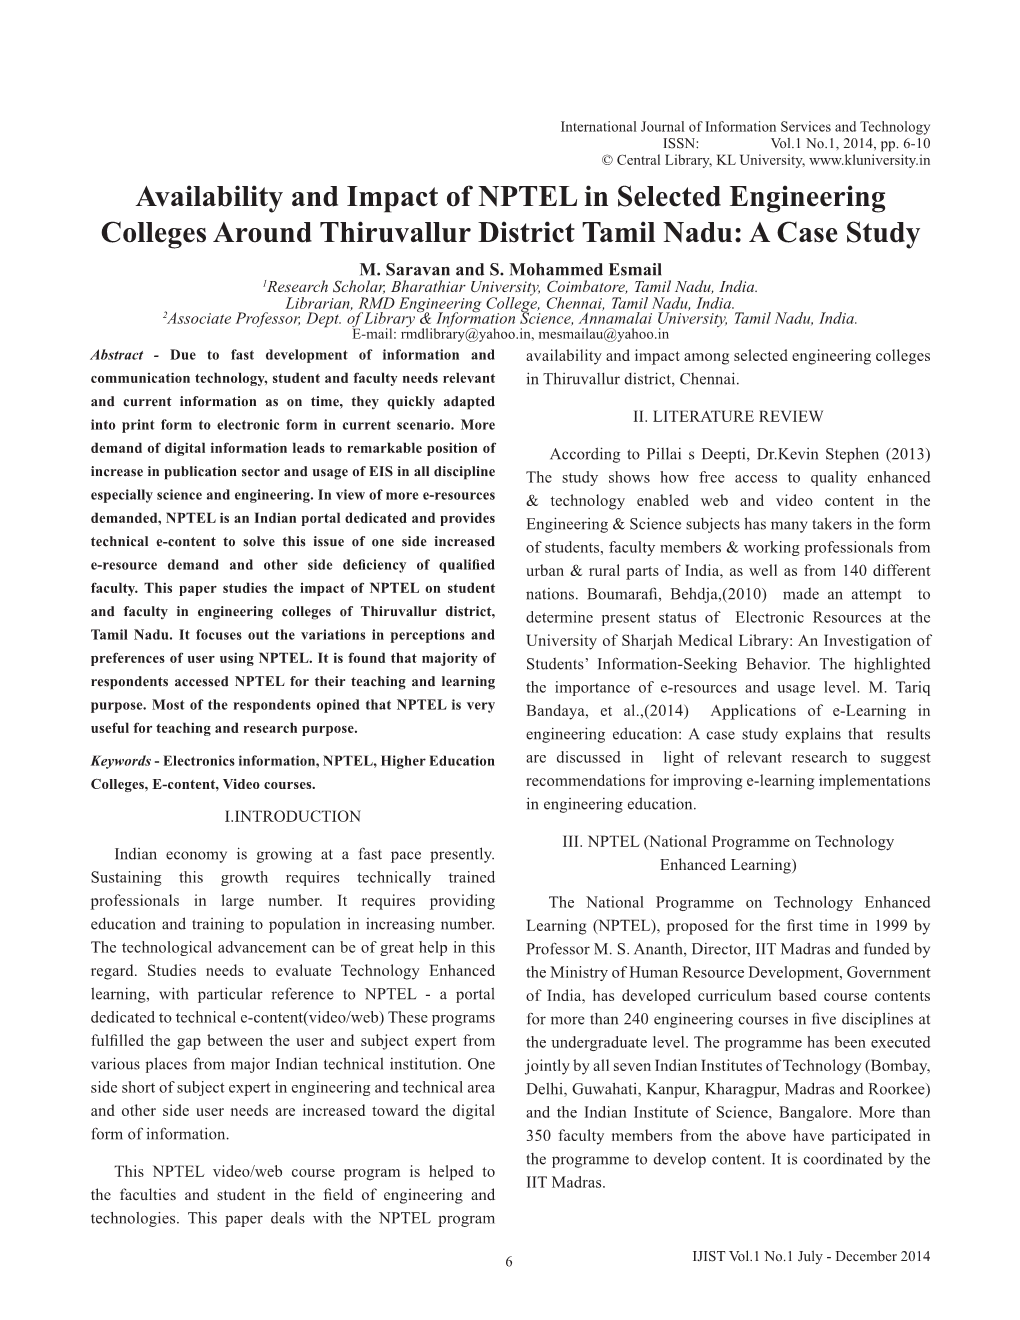 Availability and Impact of NPTEL in Selected Engineering Colleges Around Thiruvallur District Tamil Nadu: a Case Study M